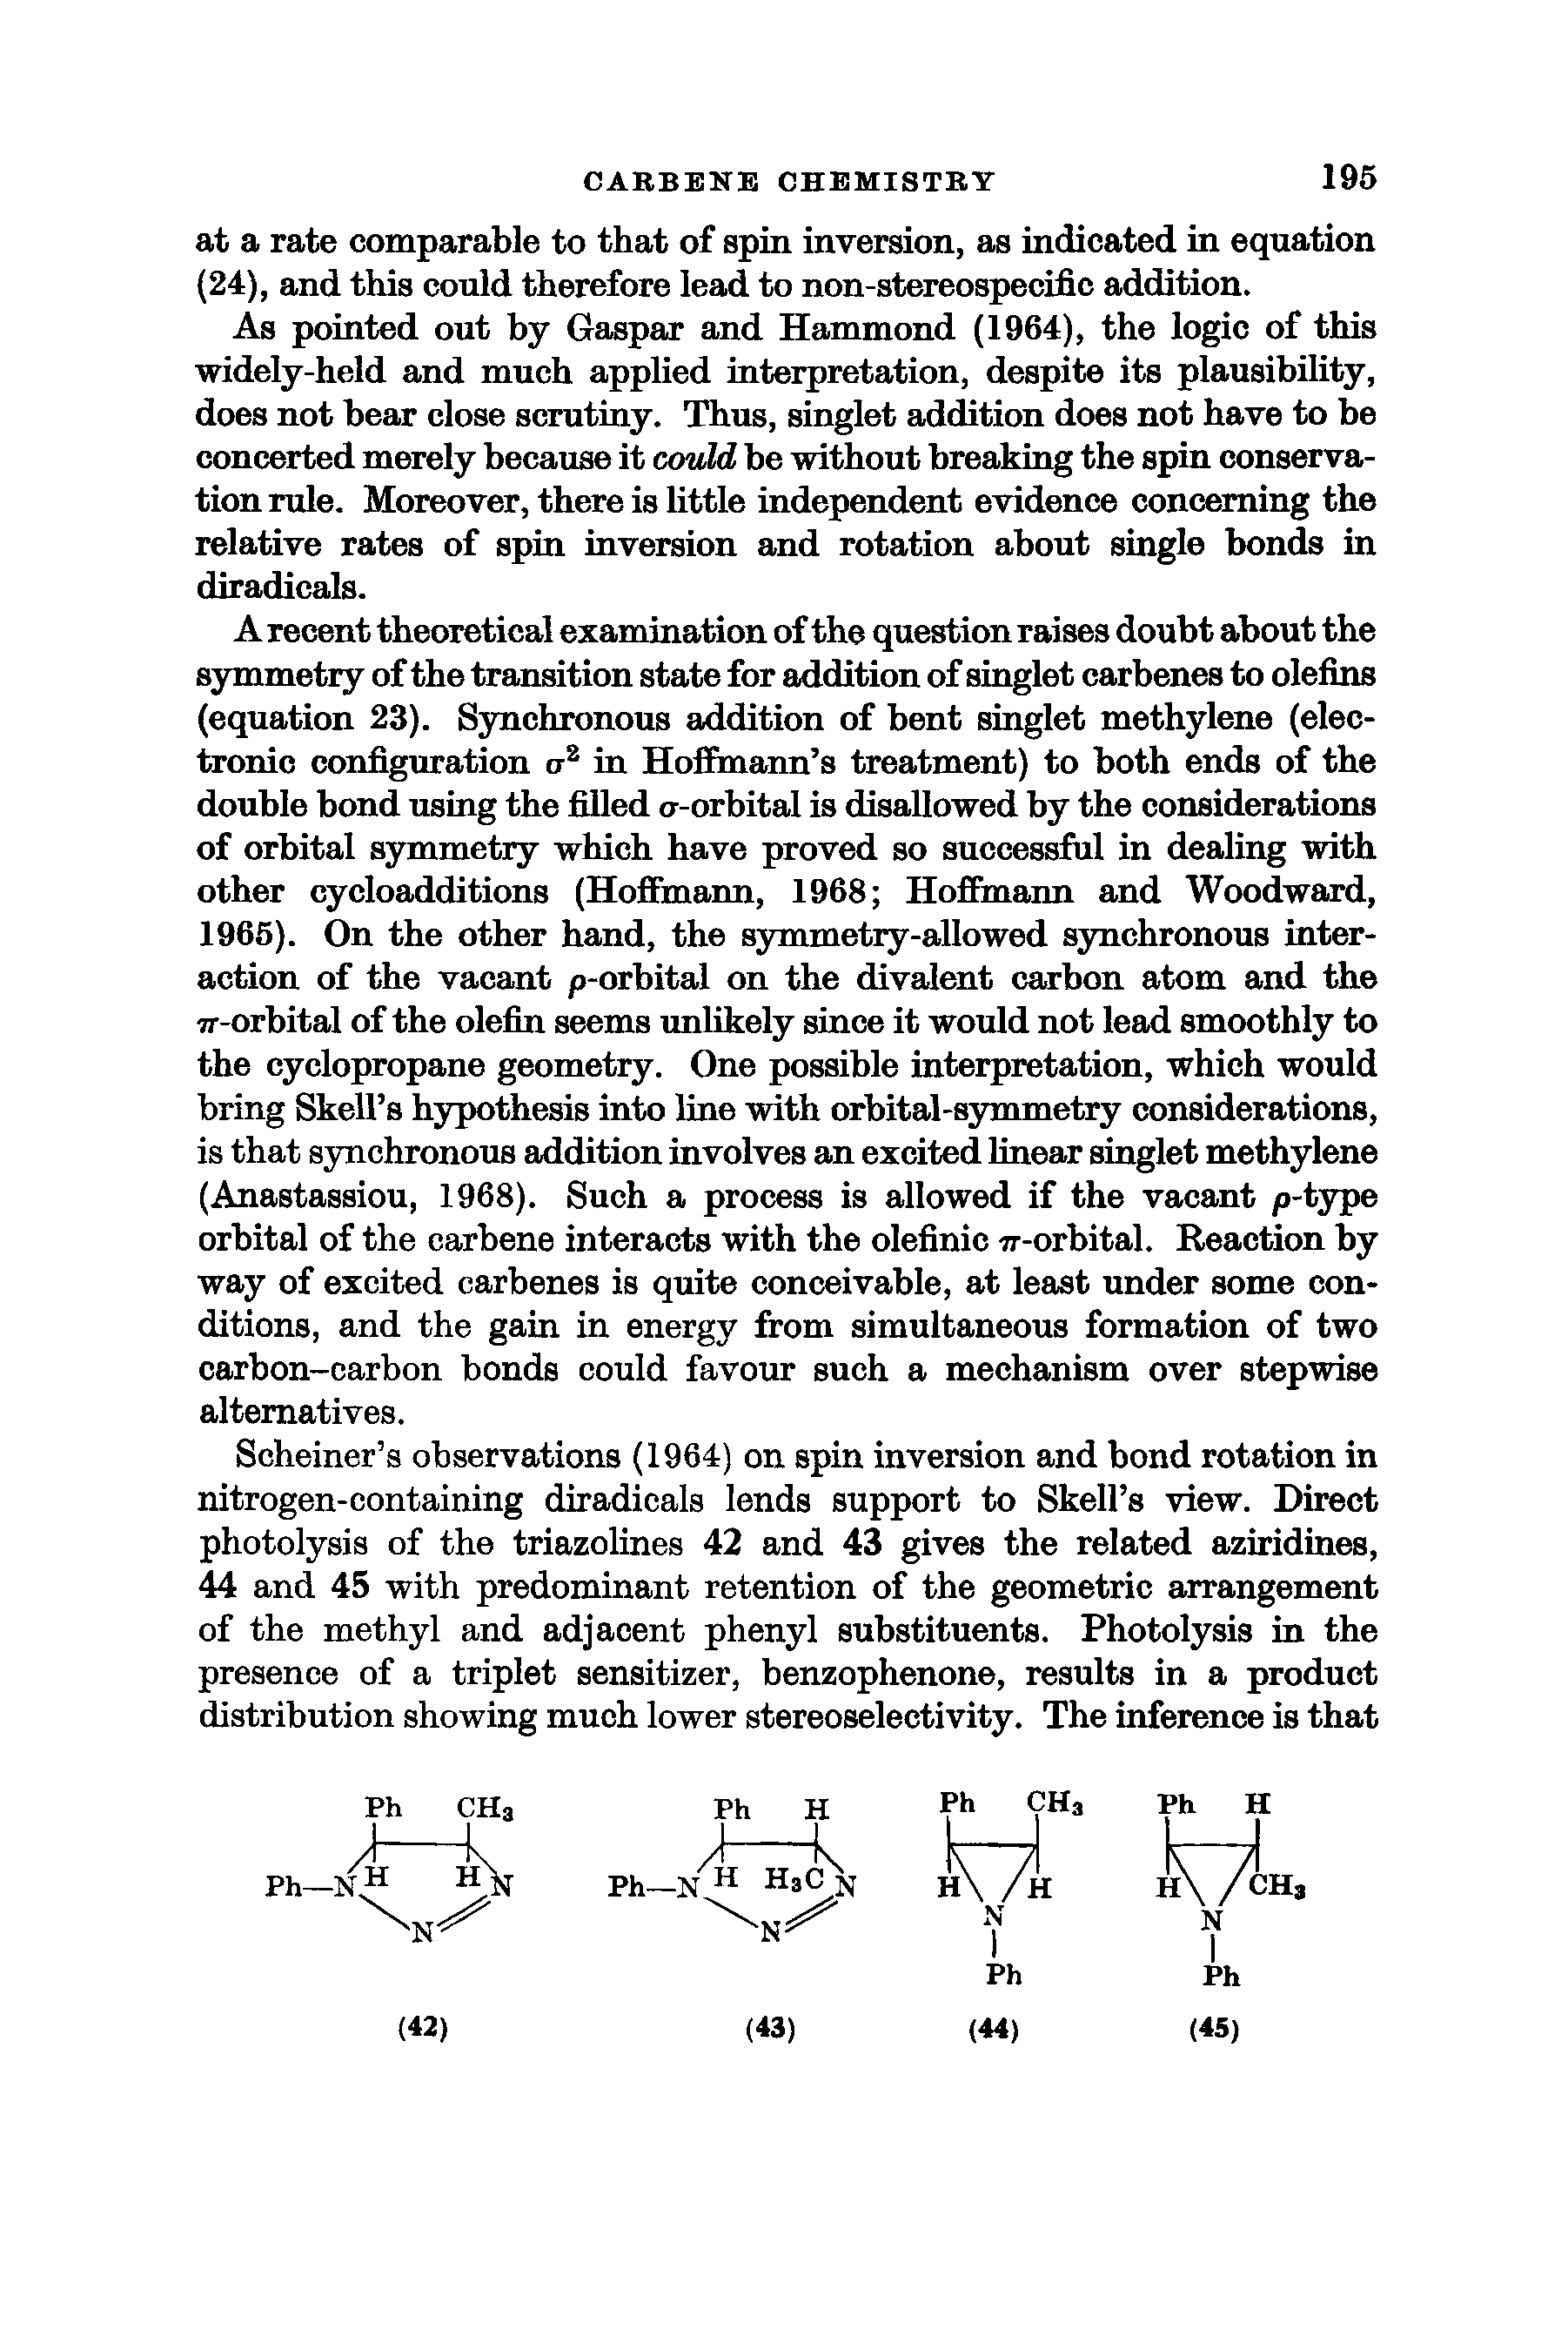 Schemer s observations (1964) on spin inversion and bond rotation in nitrogen-containing diradicals lends support to Skell s view. Direct photolysis of the triazolines 42 and 43 gives the related aziridines, 44 and 45 with predominant retention of the geometric arrangement of the methyl and adjacent phenyl substituents. Photolysis in the presence of a triplet sensitizer, benzophenone, results in a product distribution showing much lower stereoselectivity. The inference is that...